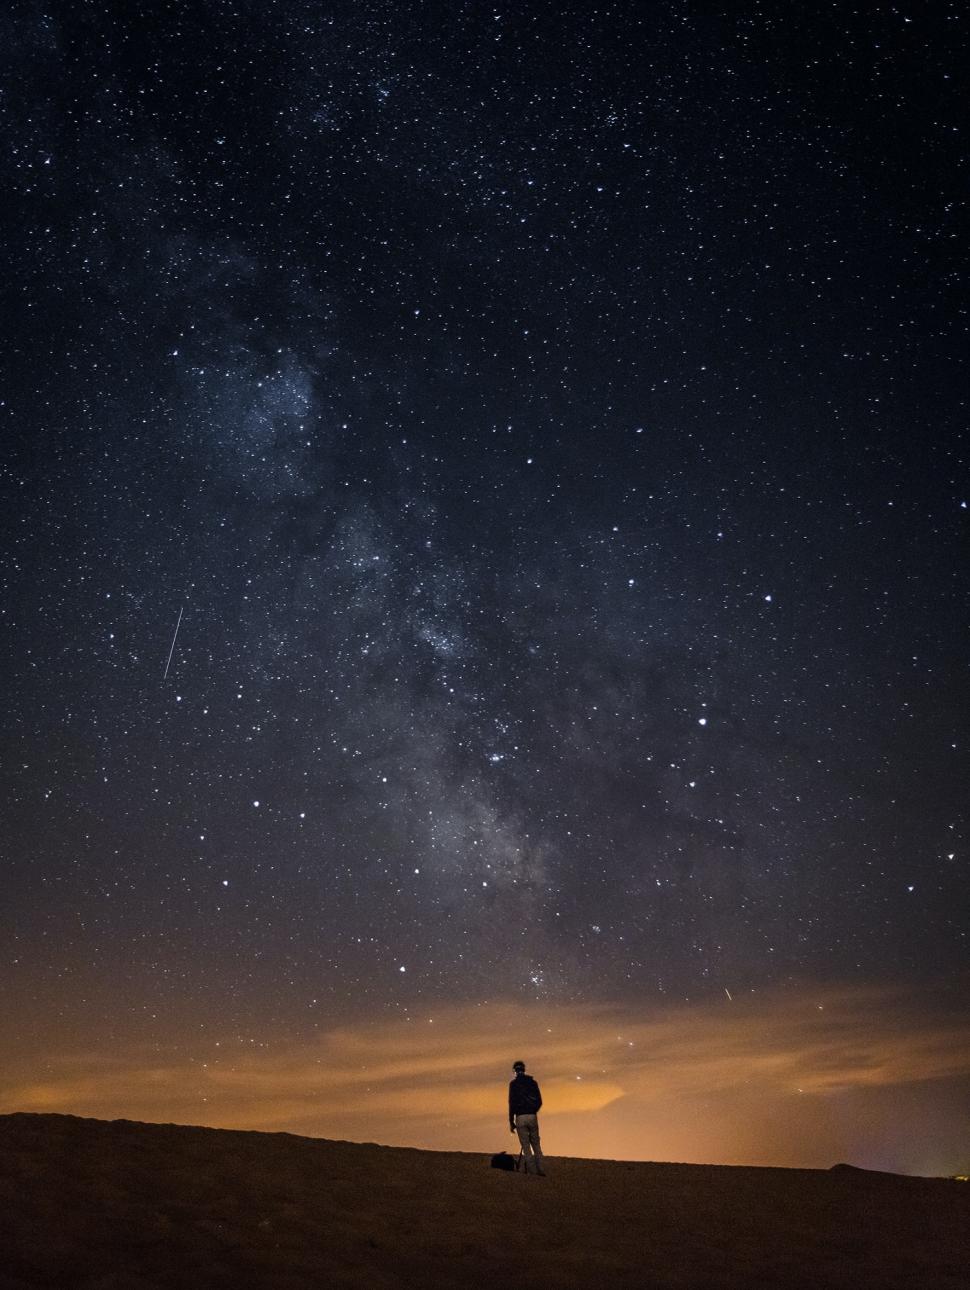 The image shows a person standing and looking up at the night sky with a view of the Milky Way 